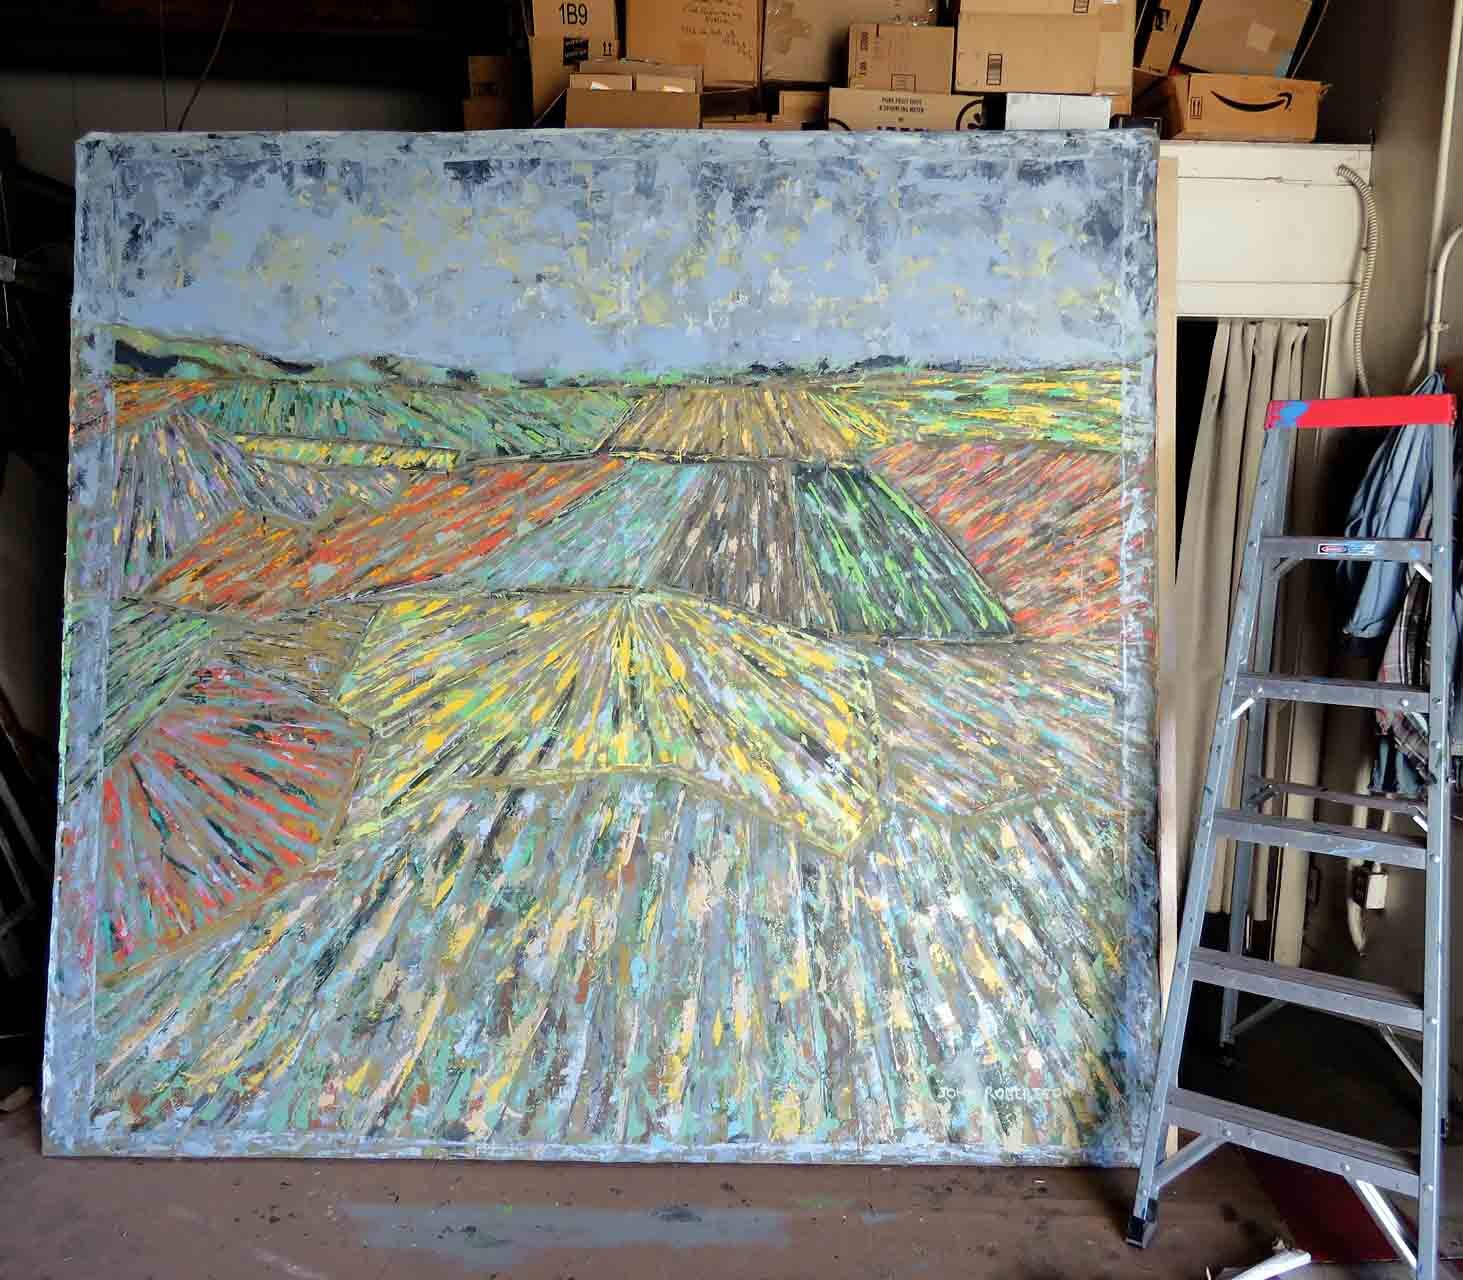 Farmland 8 ft x 8 ft acrylic on unstretched canvas